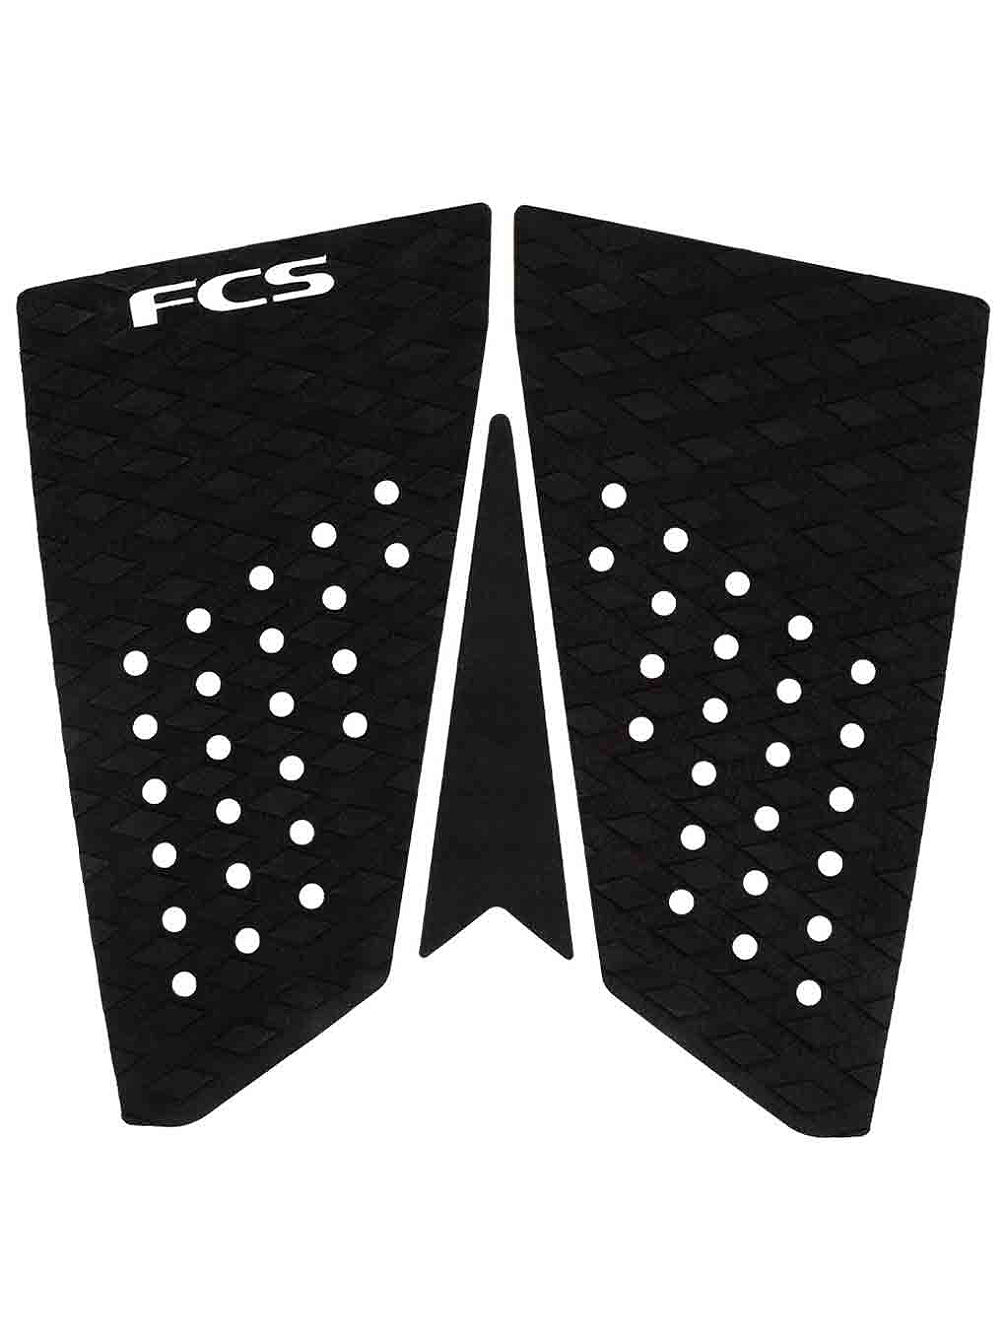 T-3 Fish Traction Tailpad